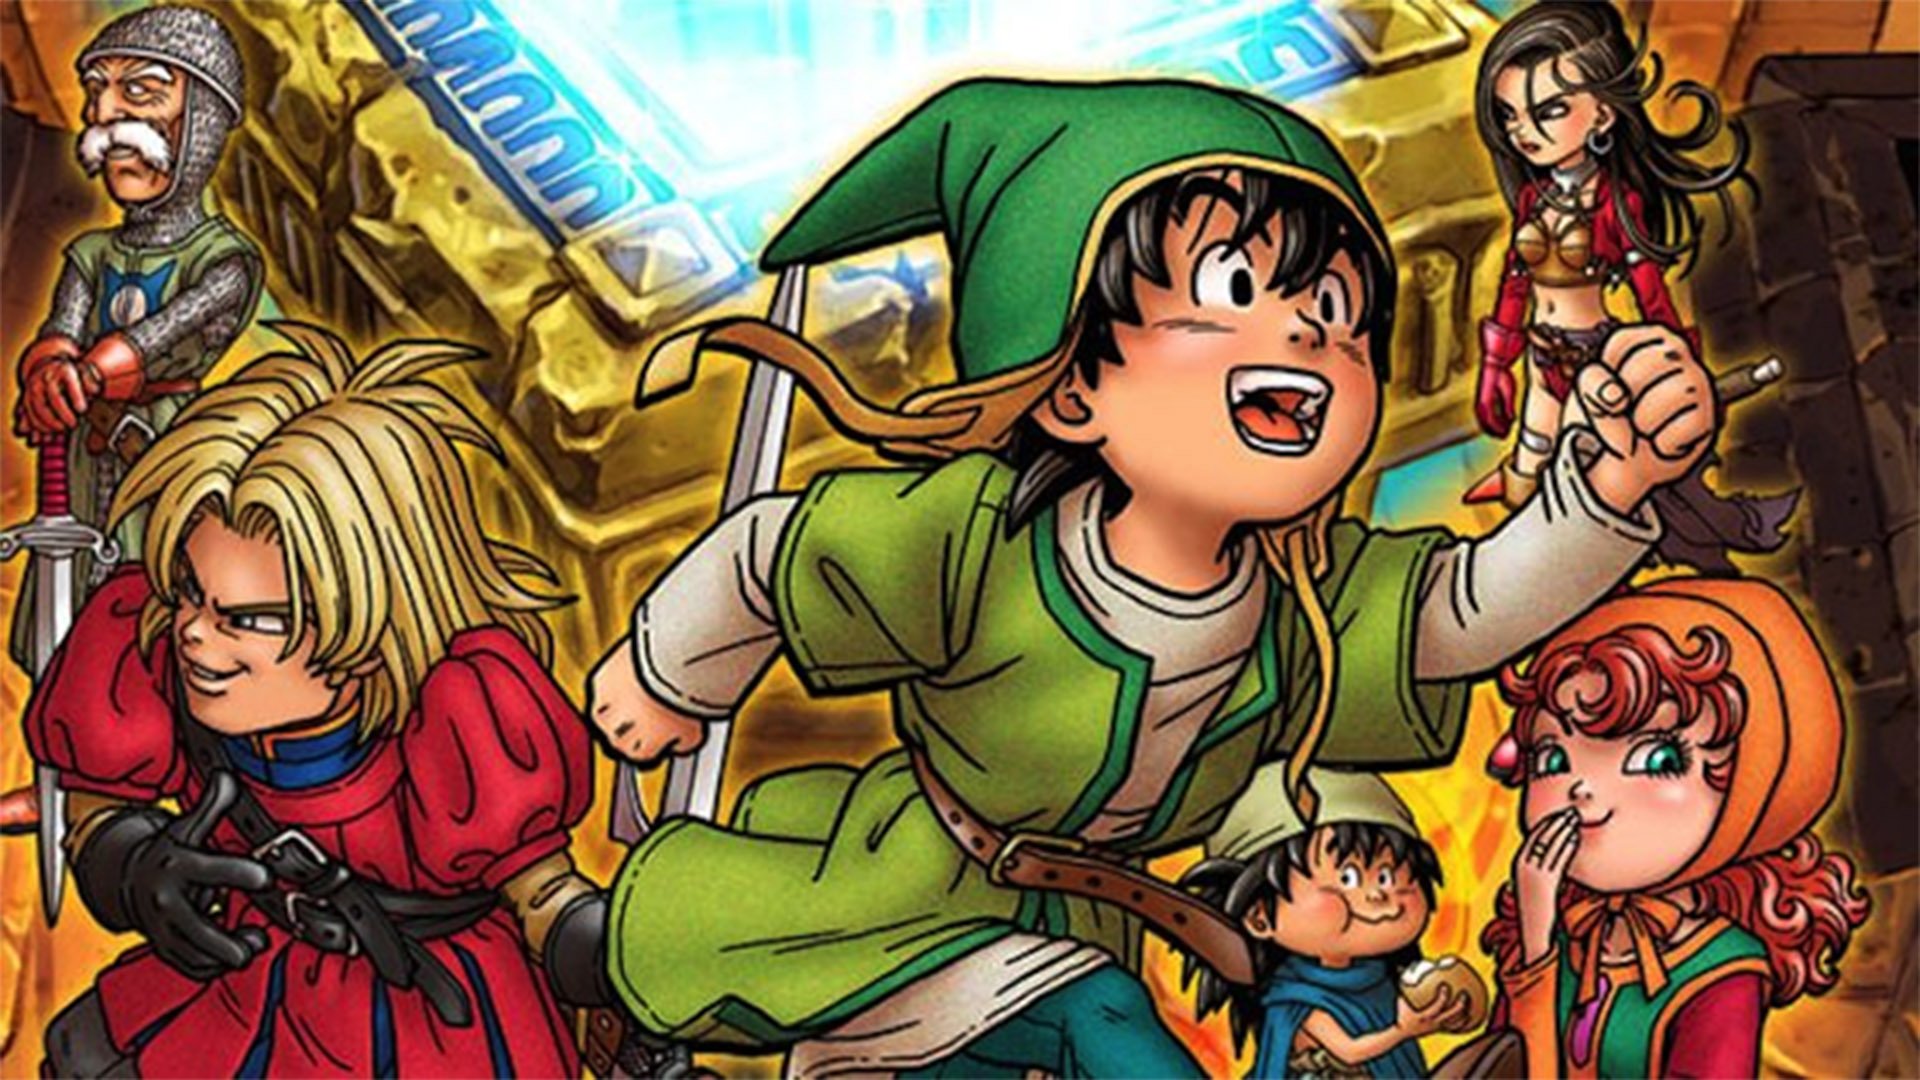 Dragon Quest Vii S Incredibly Long And Winding Road Retronauts